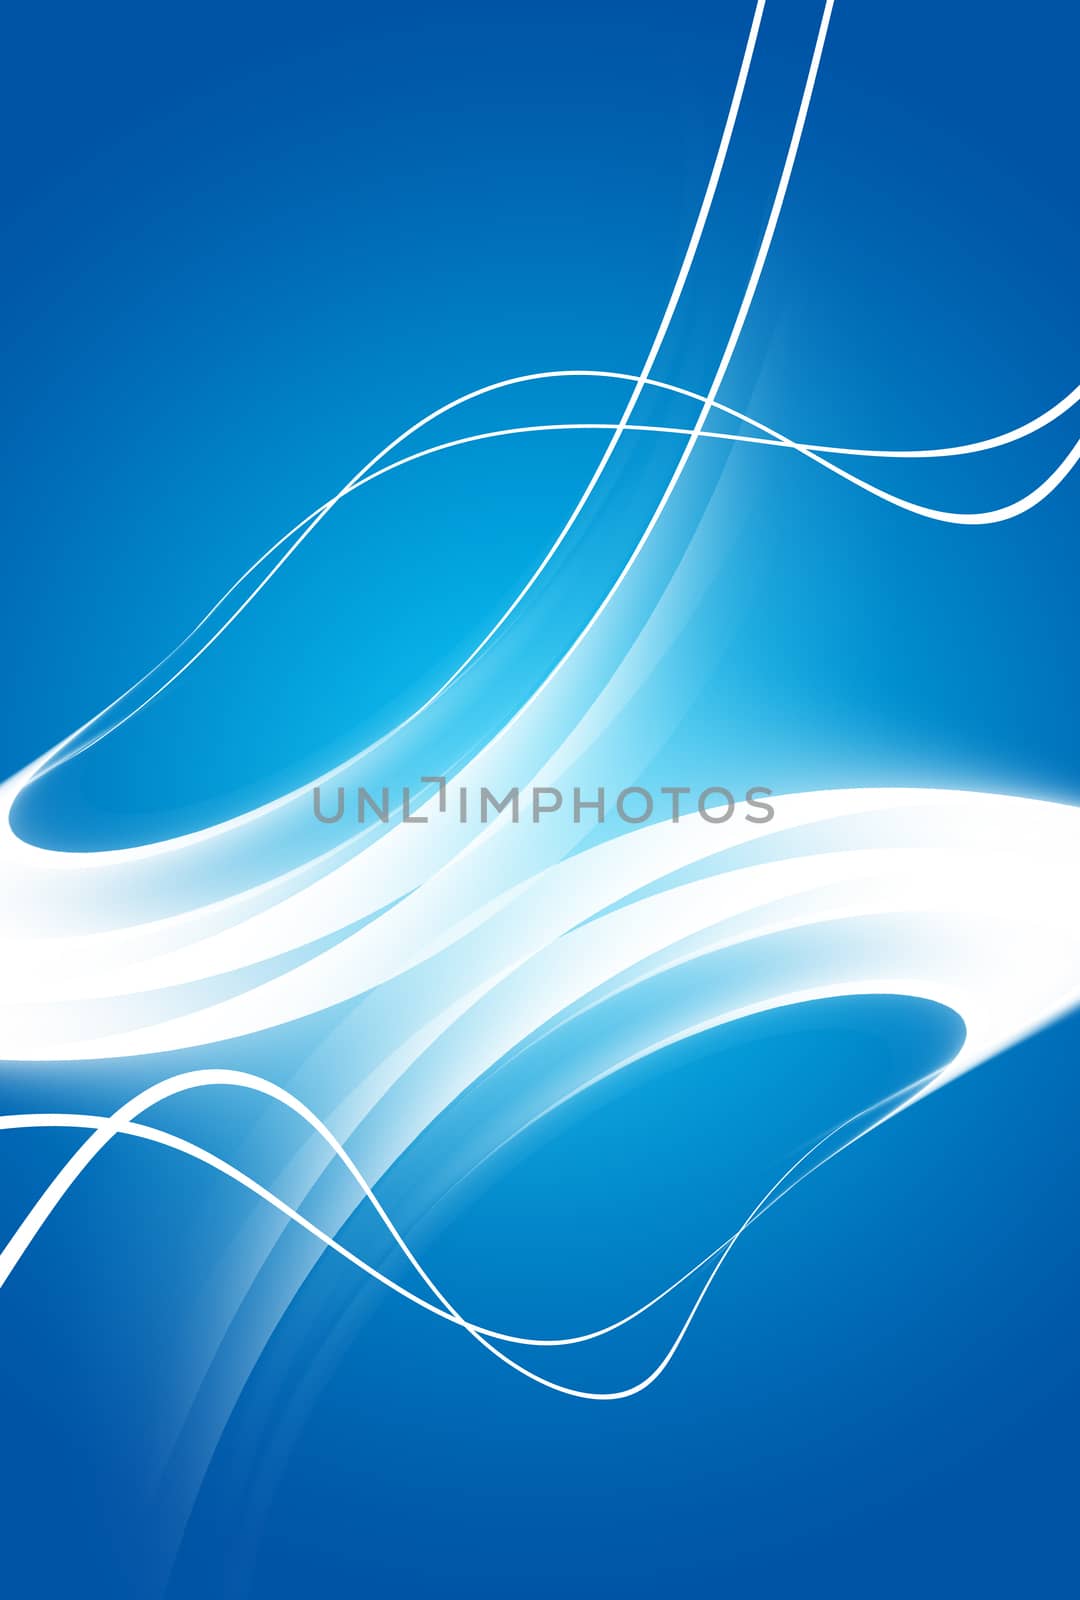 Abstract blue background with glowing white curves by bluemoon1981